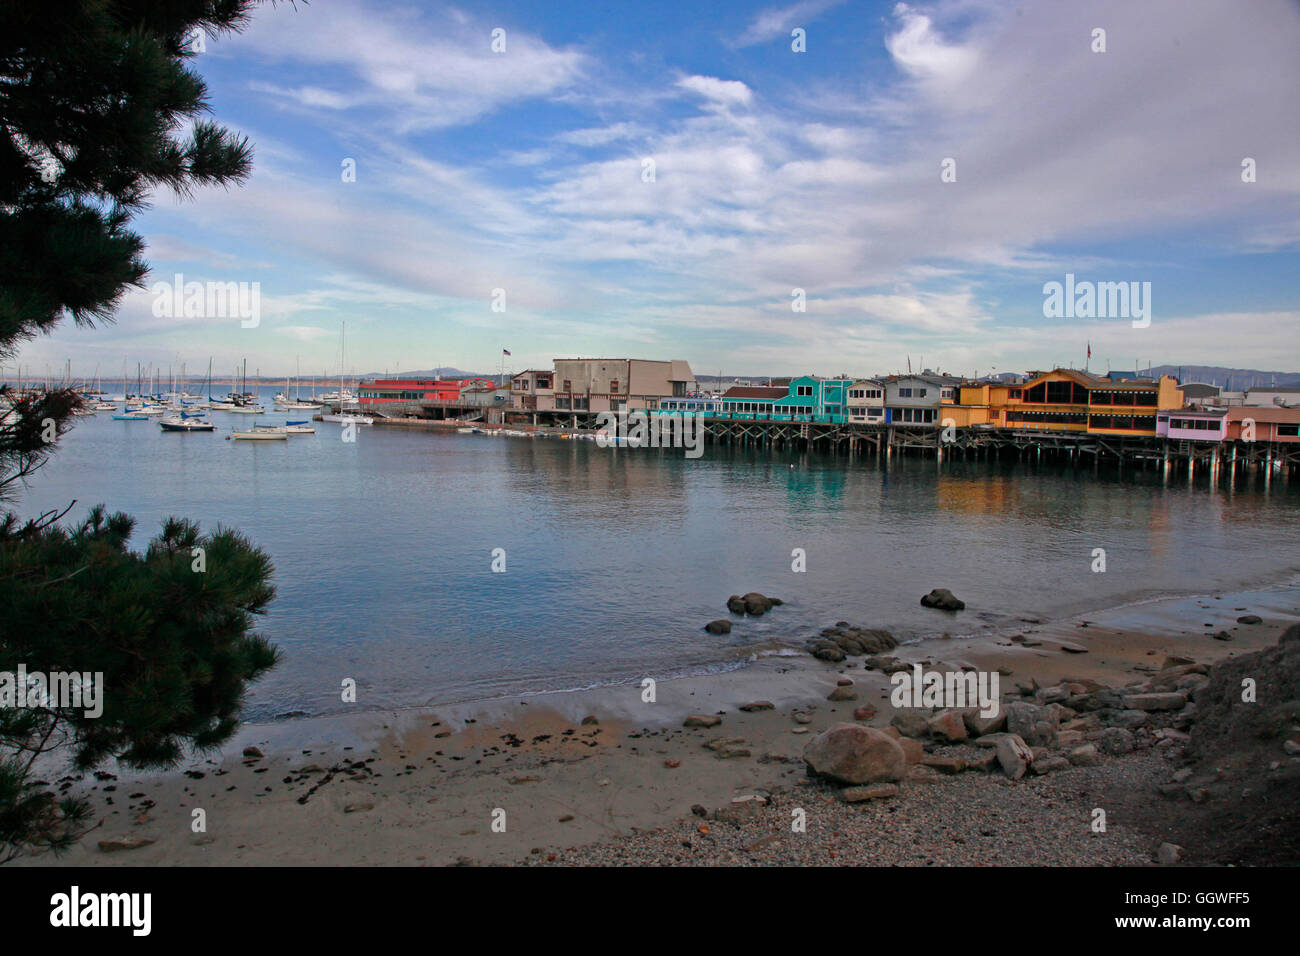 Shops at FISHERMANS WHARF overlook the harbour - MONTEREY, CALIFORNIA Stock Photo